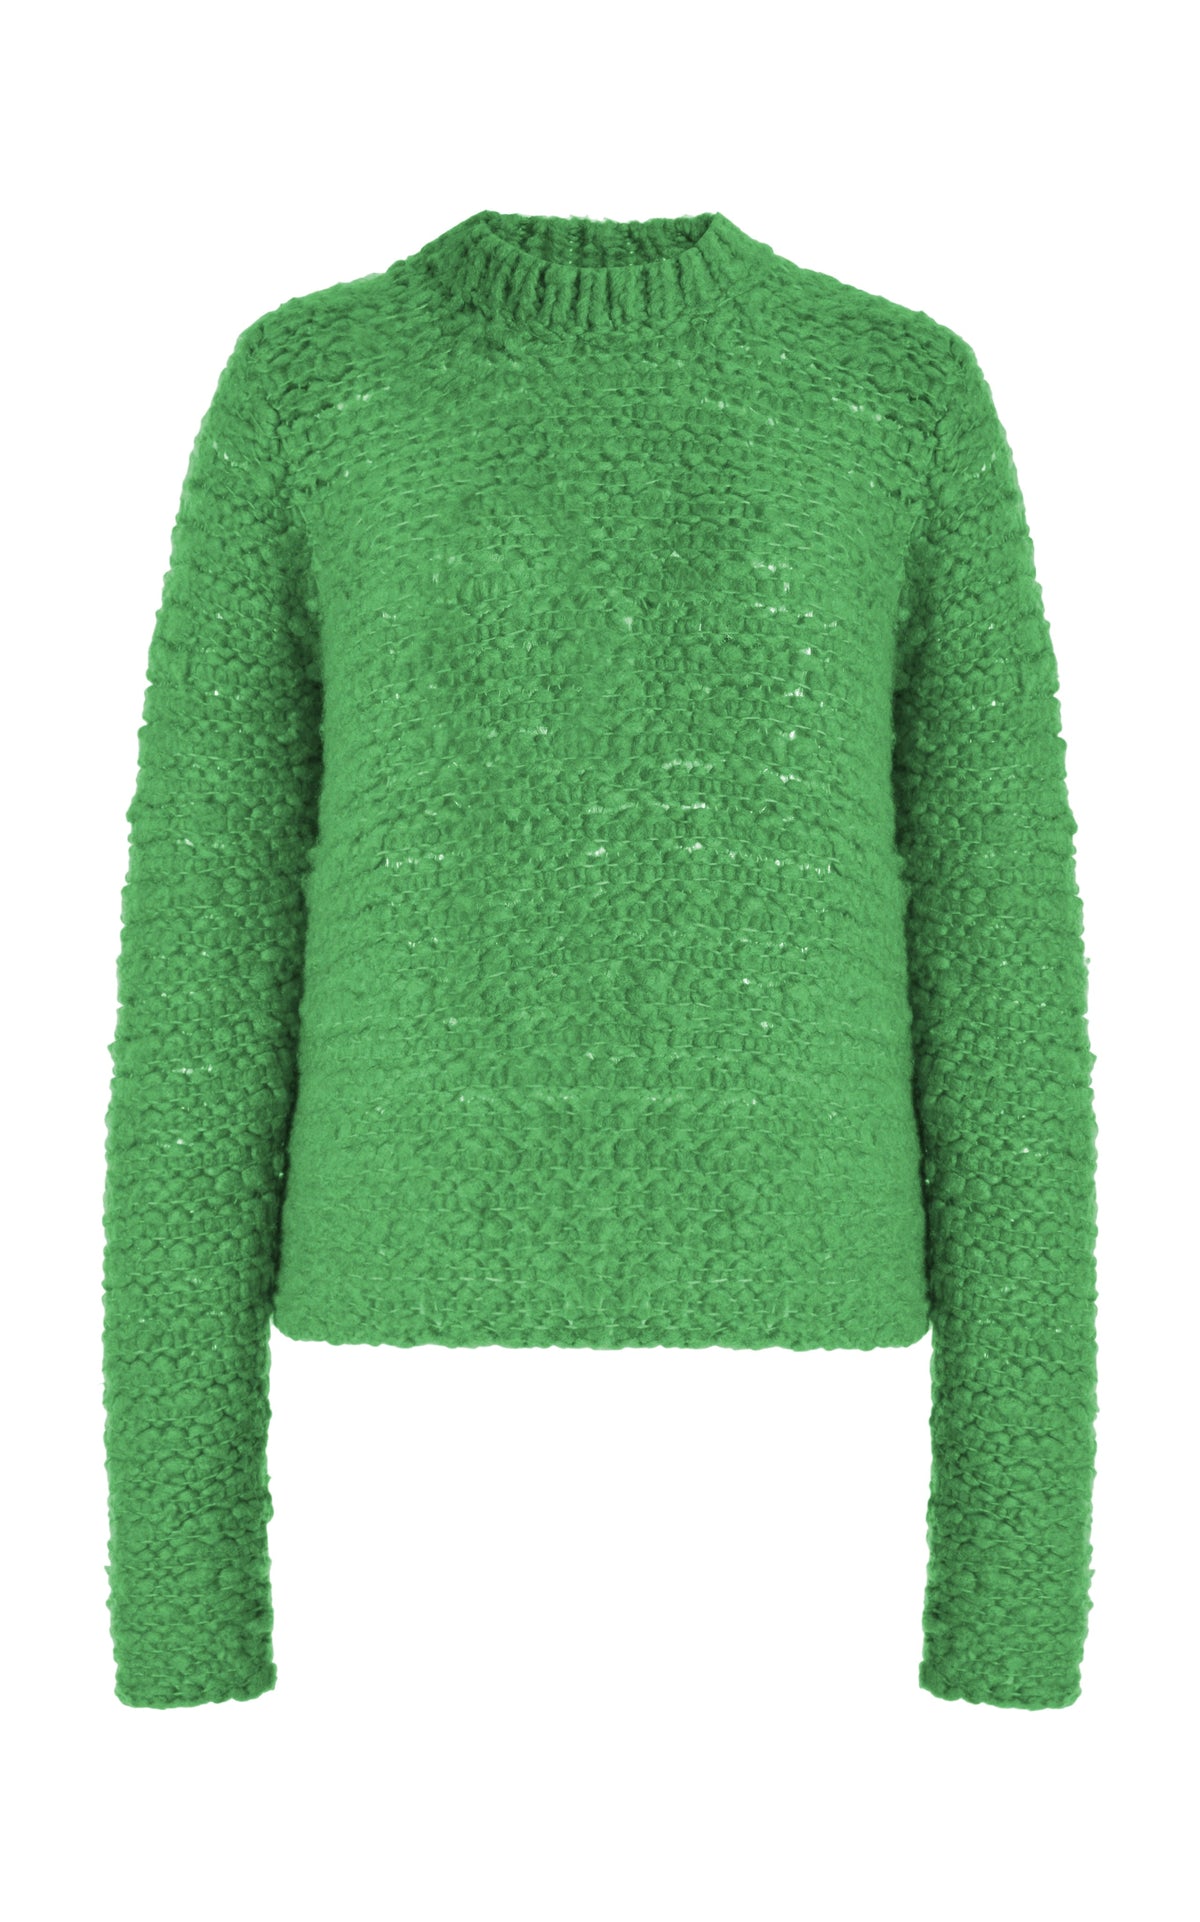 Durand Knit Sweater in Peridot Green Welfat Cashmere